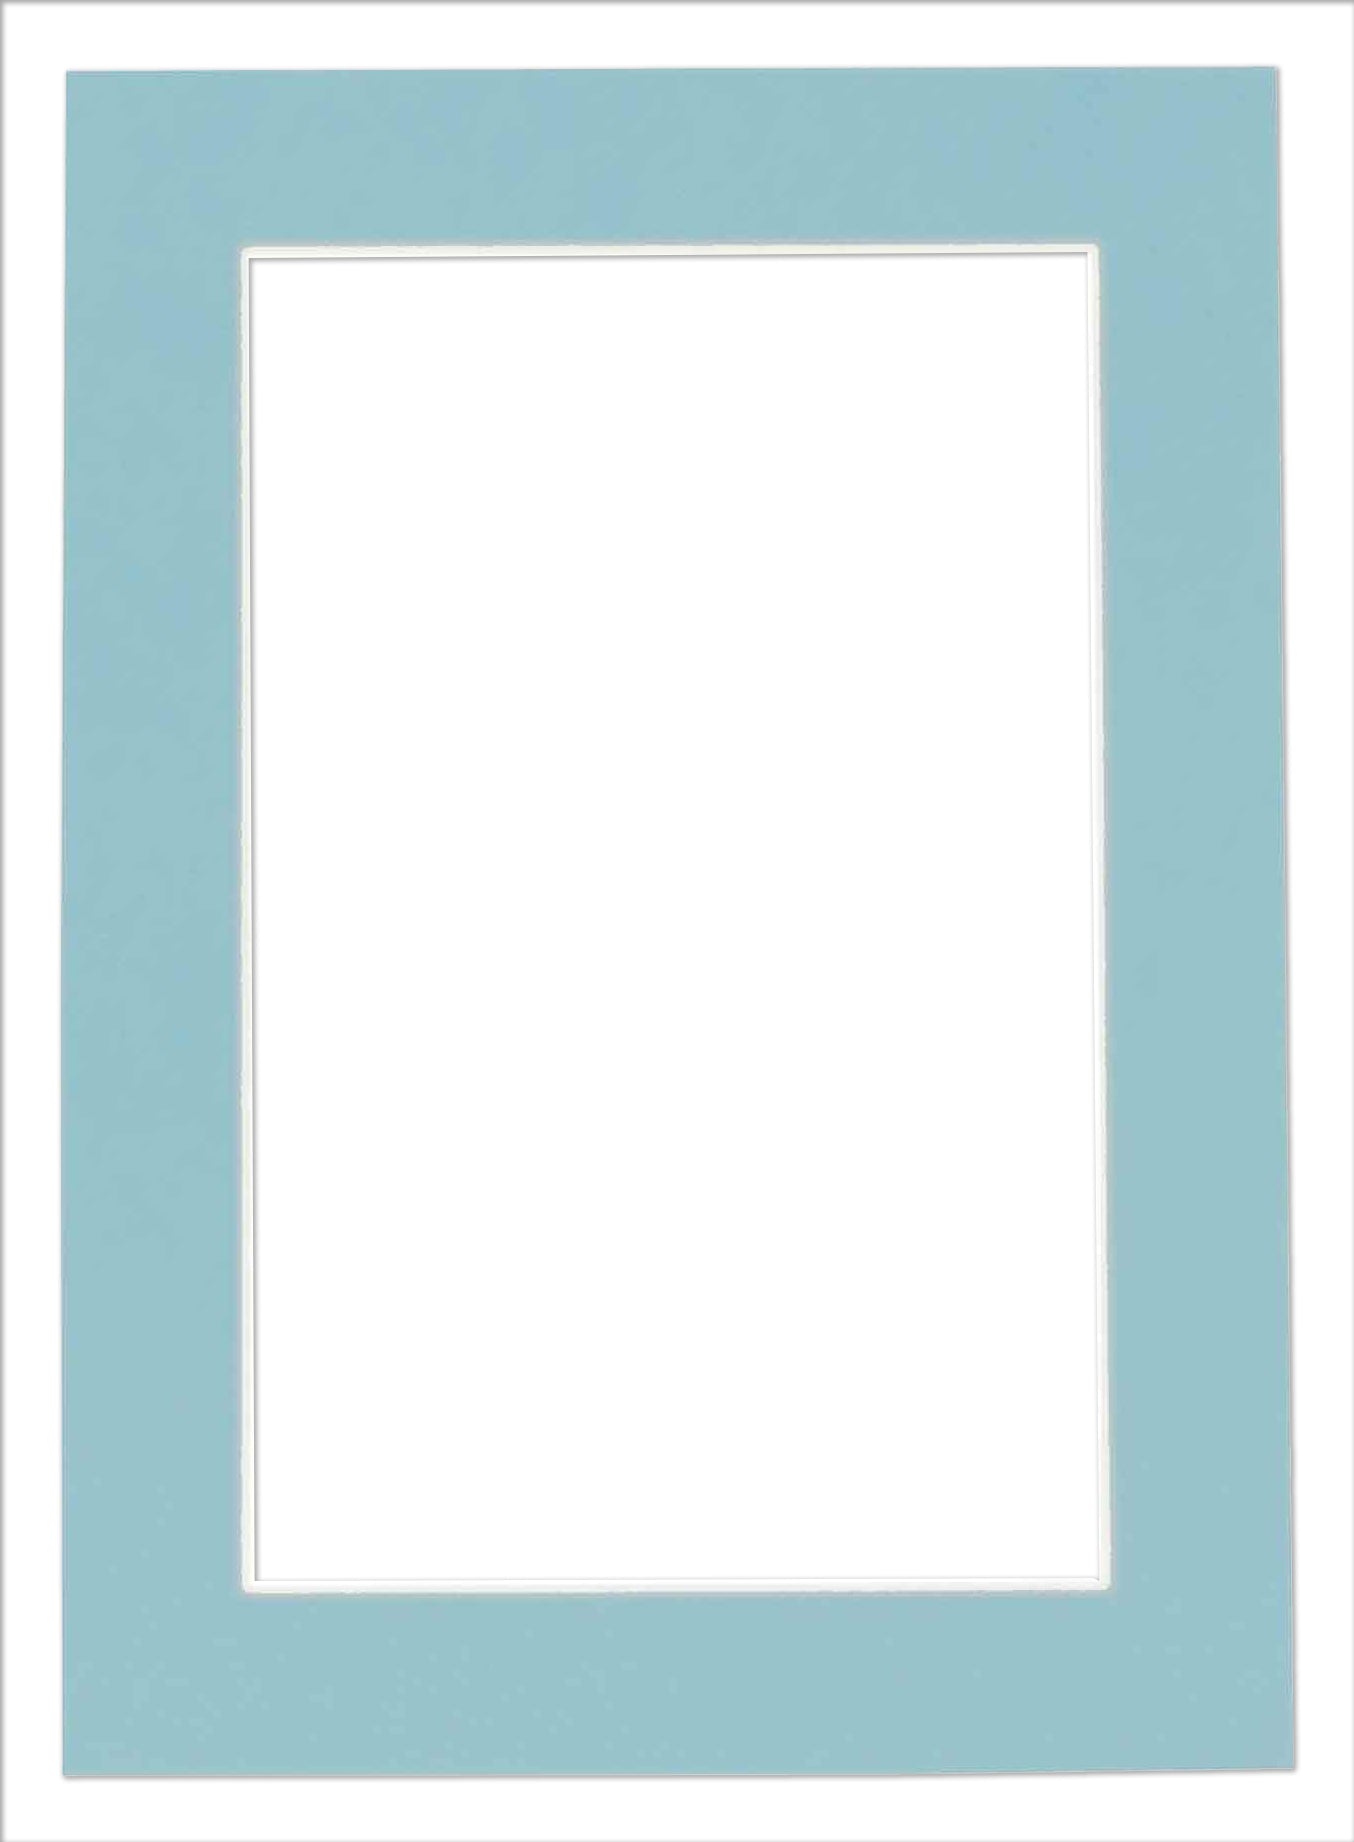 8x10 Mat for 12x16 Frame - Precut Mat Board Acid-Free Aqua Blue 8x10 Photo  Matte Made to Fit a 12x16 Picture Frame, Premium Matboard for Family